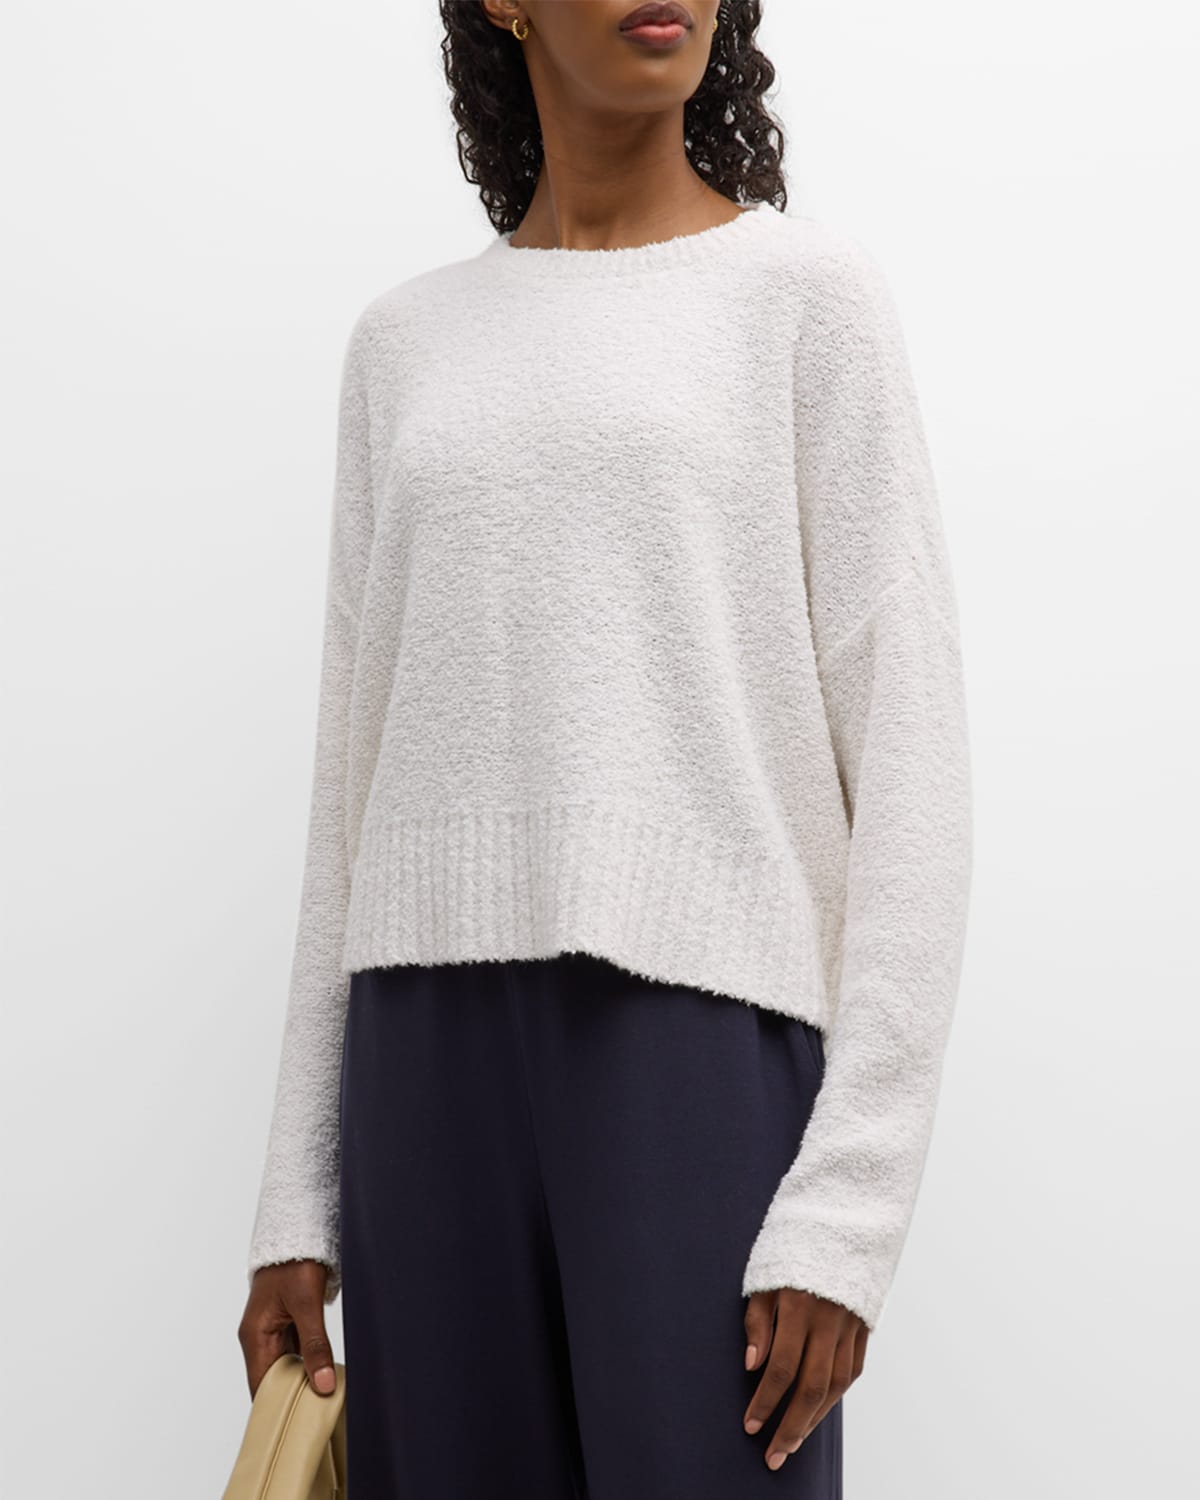 EILEEN FISHER CREWNECK BOUCLE CASHMERE-BLEND SWEATER